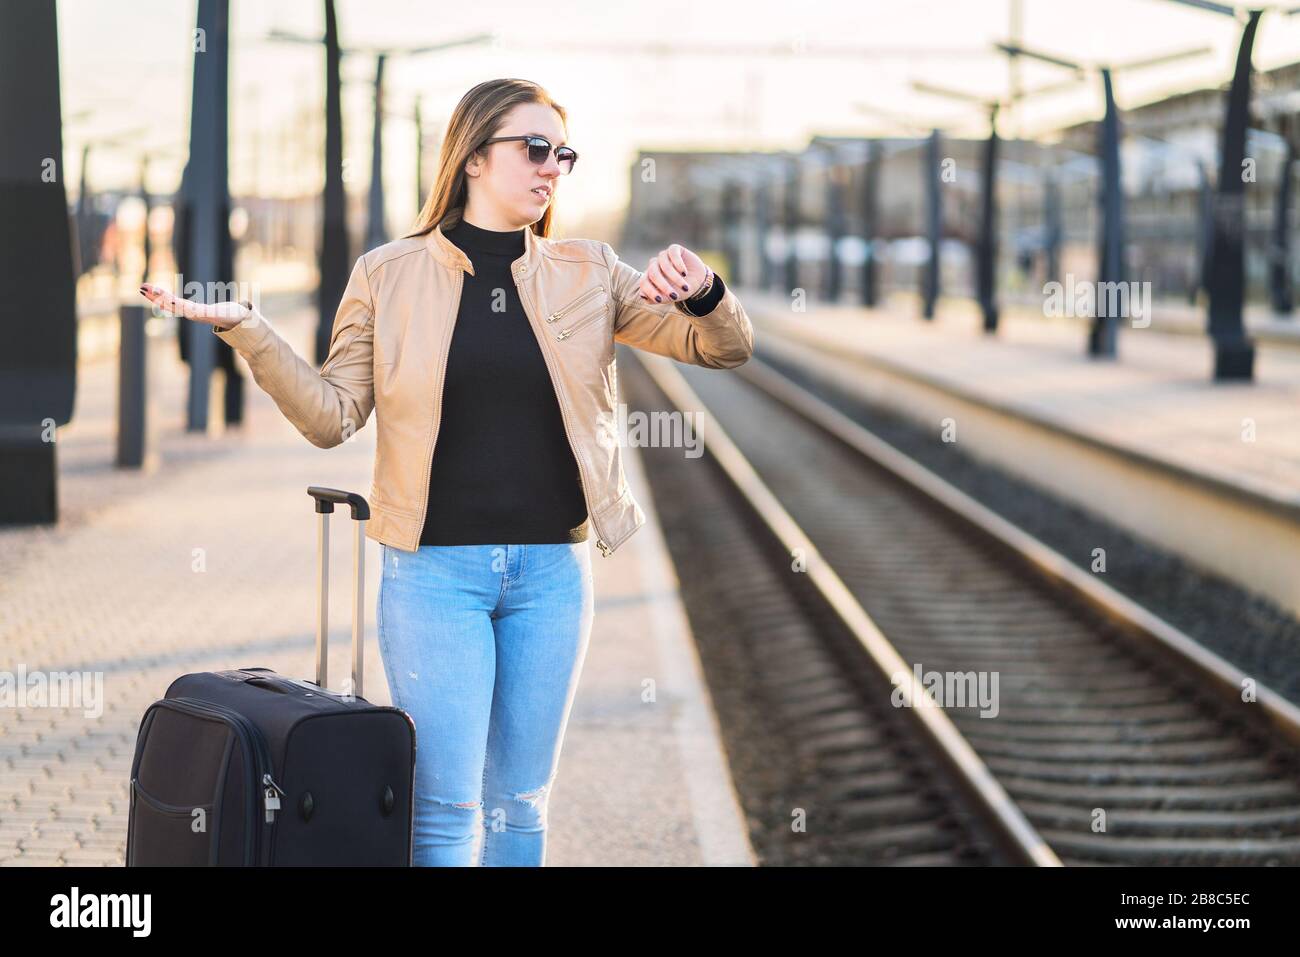 Train late, delayed, canceled or behind schedule. Confused woman looking at the time and watch while waiting in platform. Stock Photo